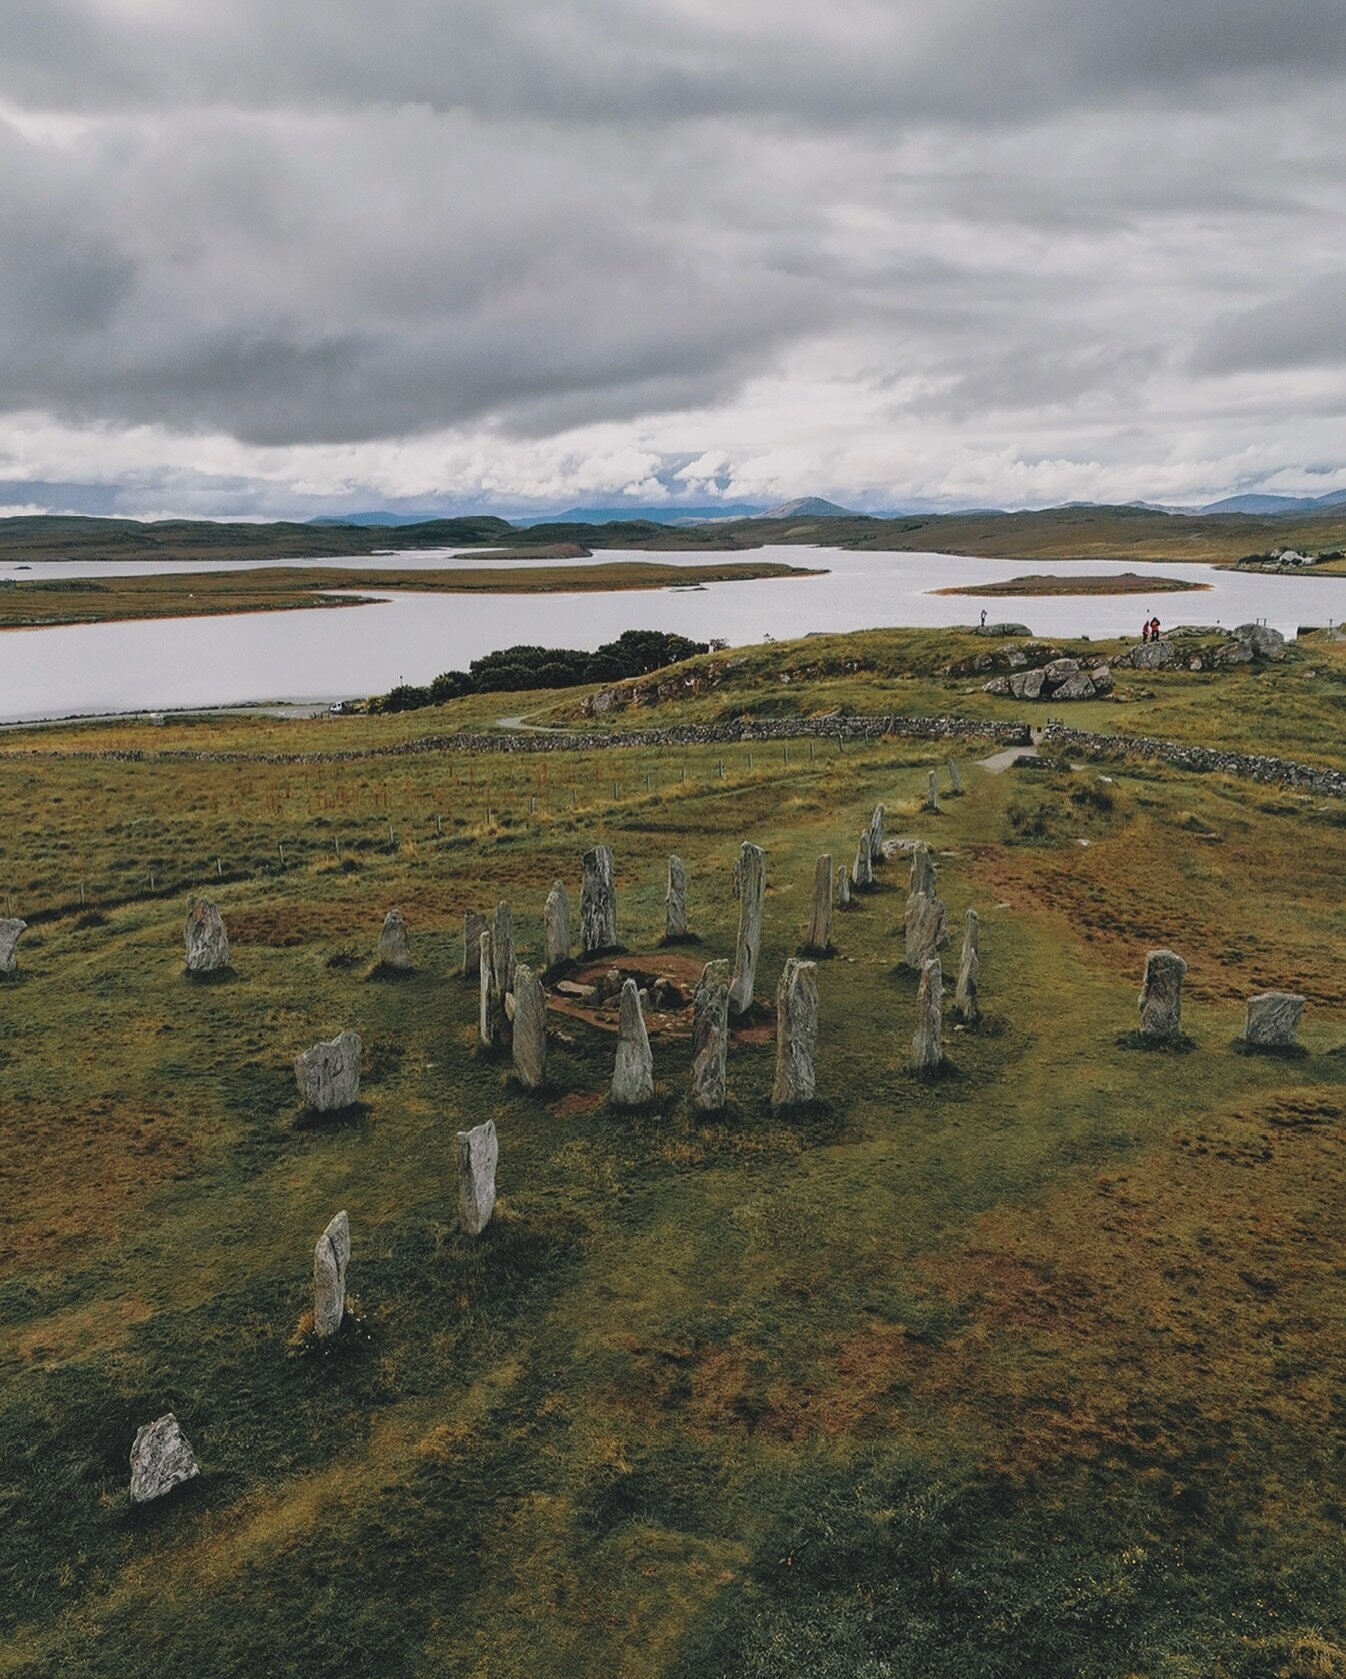 C A L A N A I S

The Calanais Standing Stones, also known as the Callanish Stones or Tursachan Chalanais in Scottish Gaelic, are an extraordinary arrangement of megalithic structures located on the Isle of Lewis in the Outer Hebrides of Scotland. The